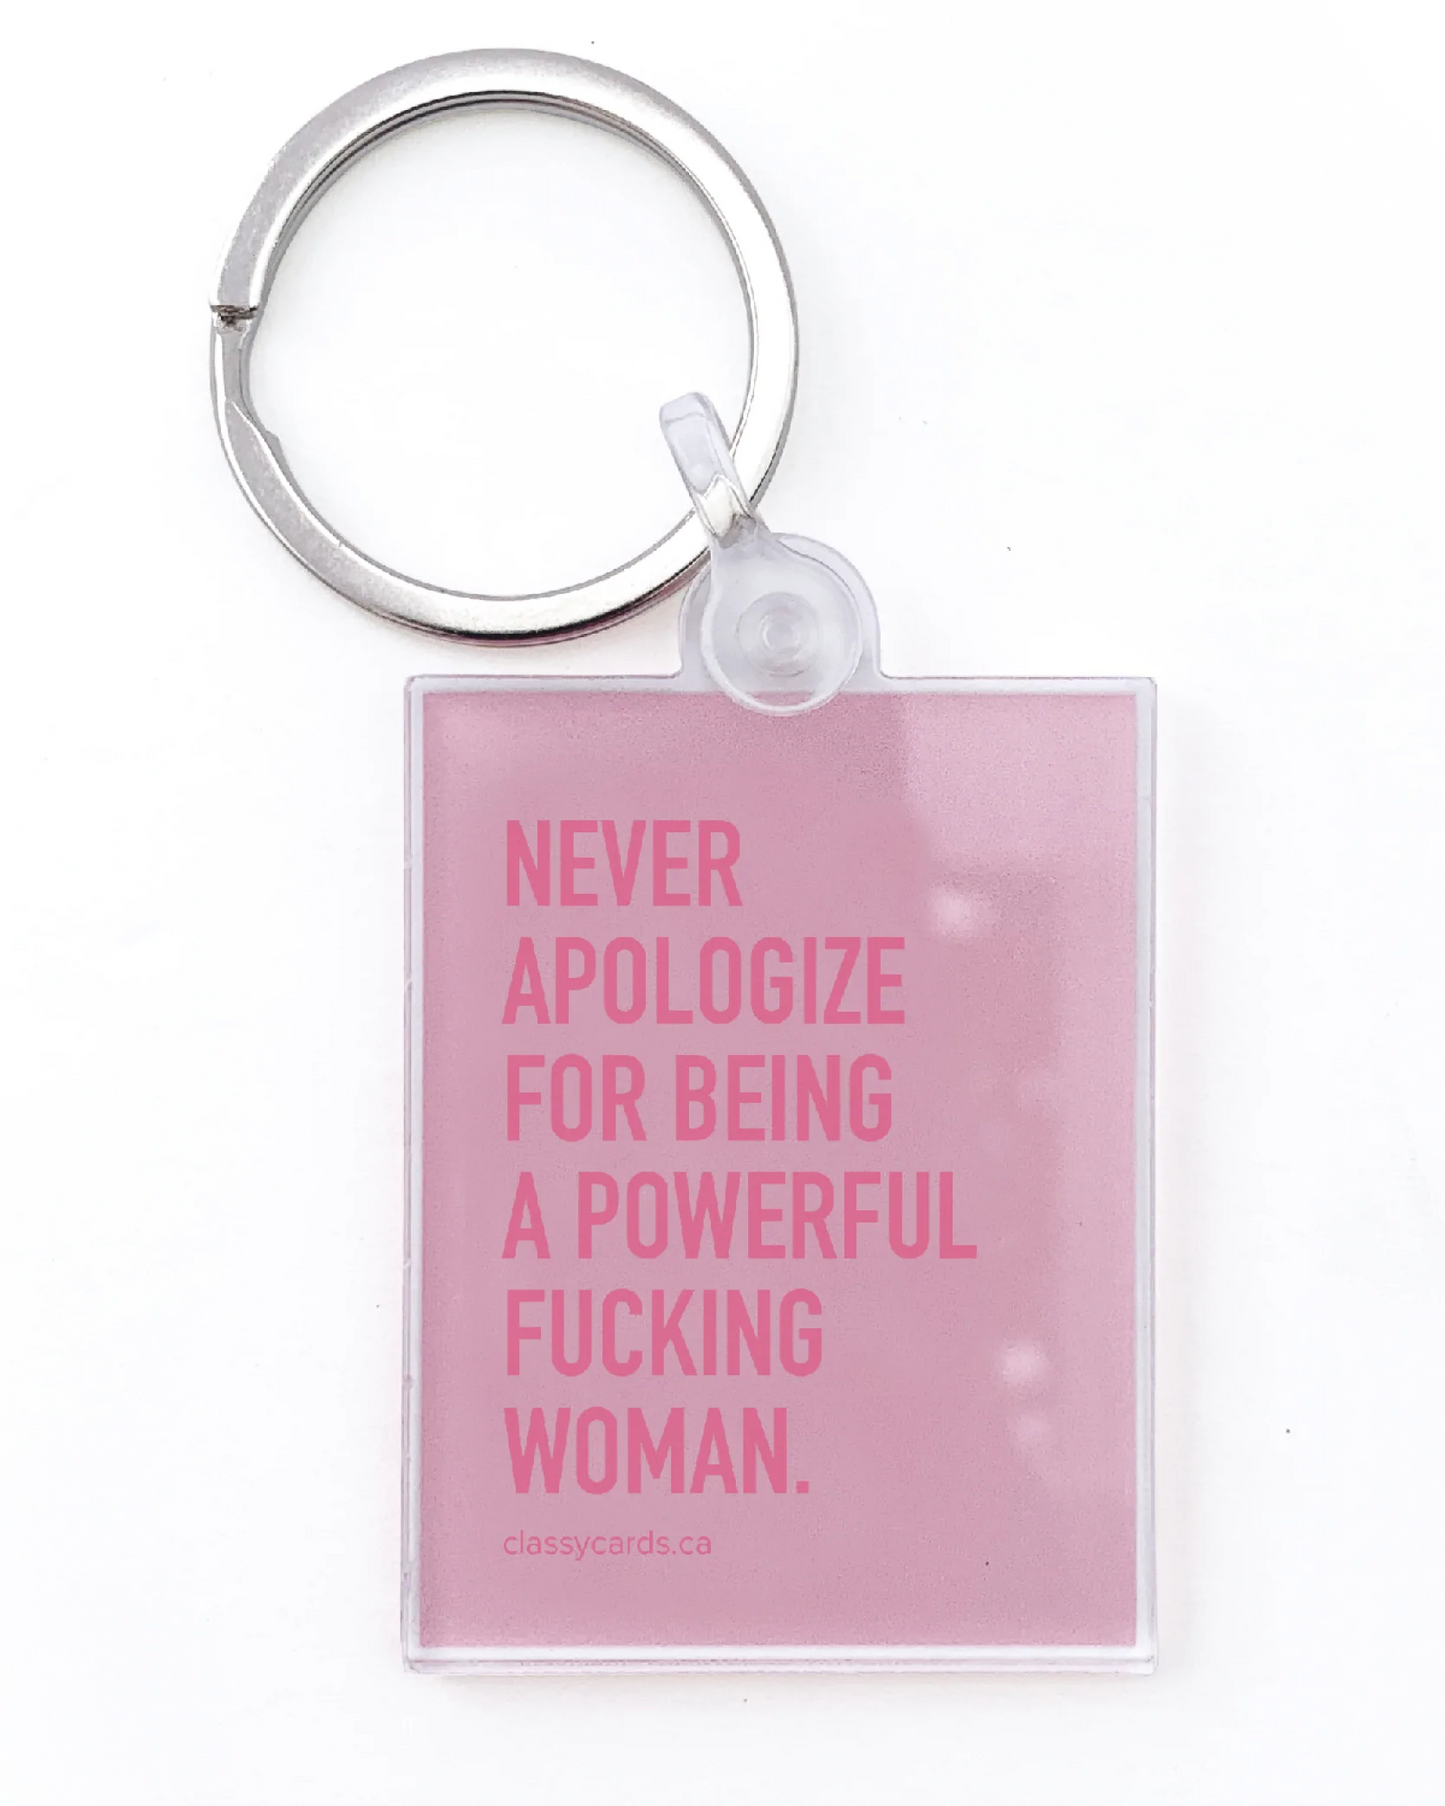 Classy Cards Funny Keychains